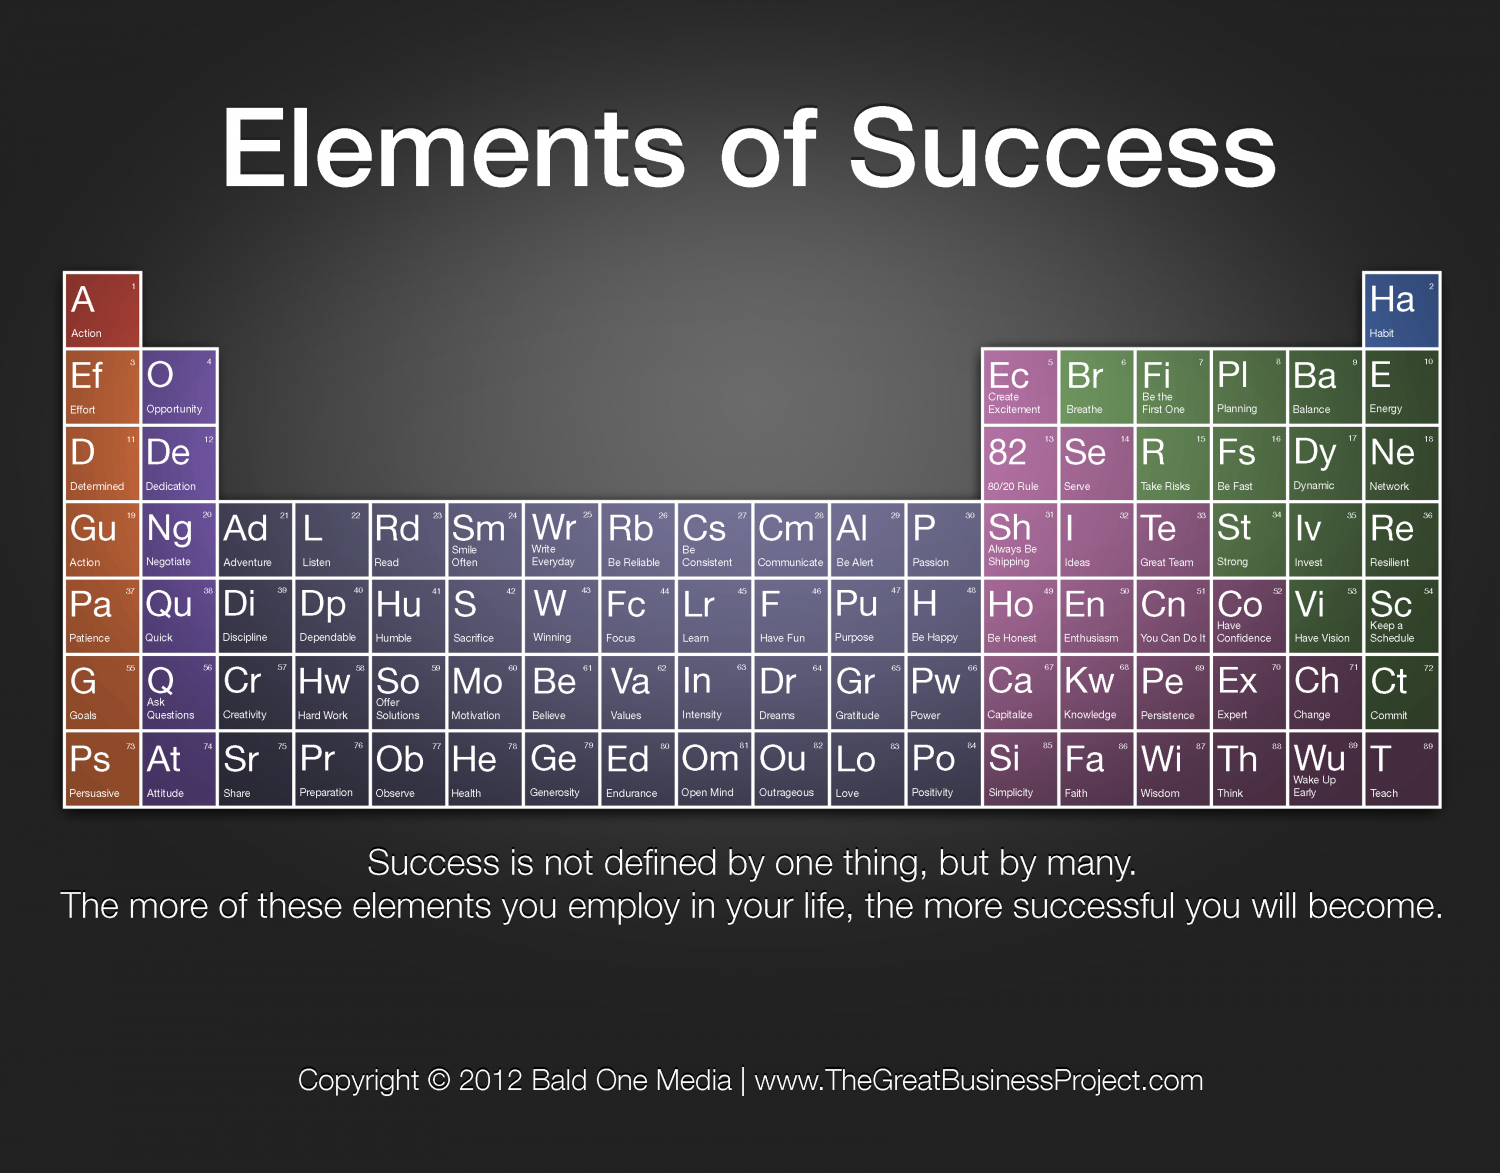 The Elements of Success Infographic